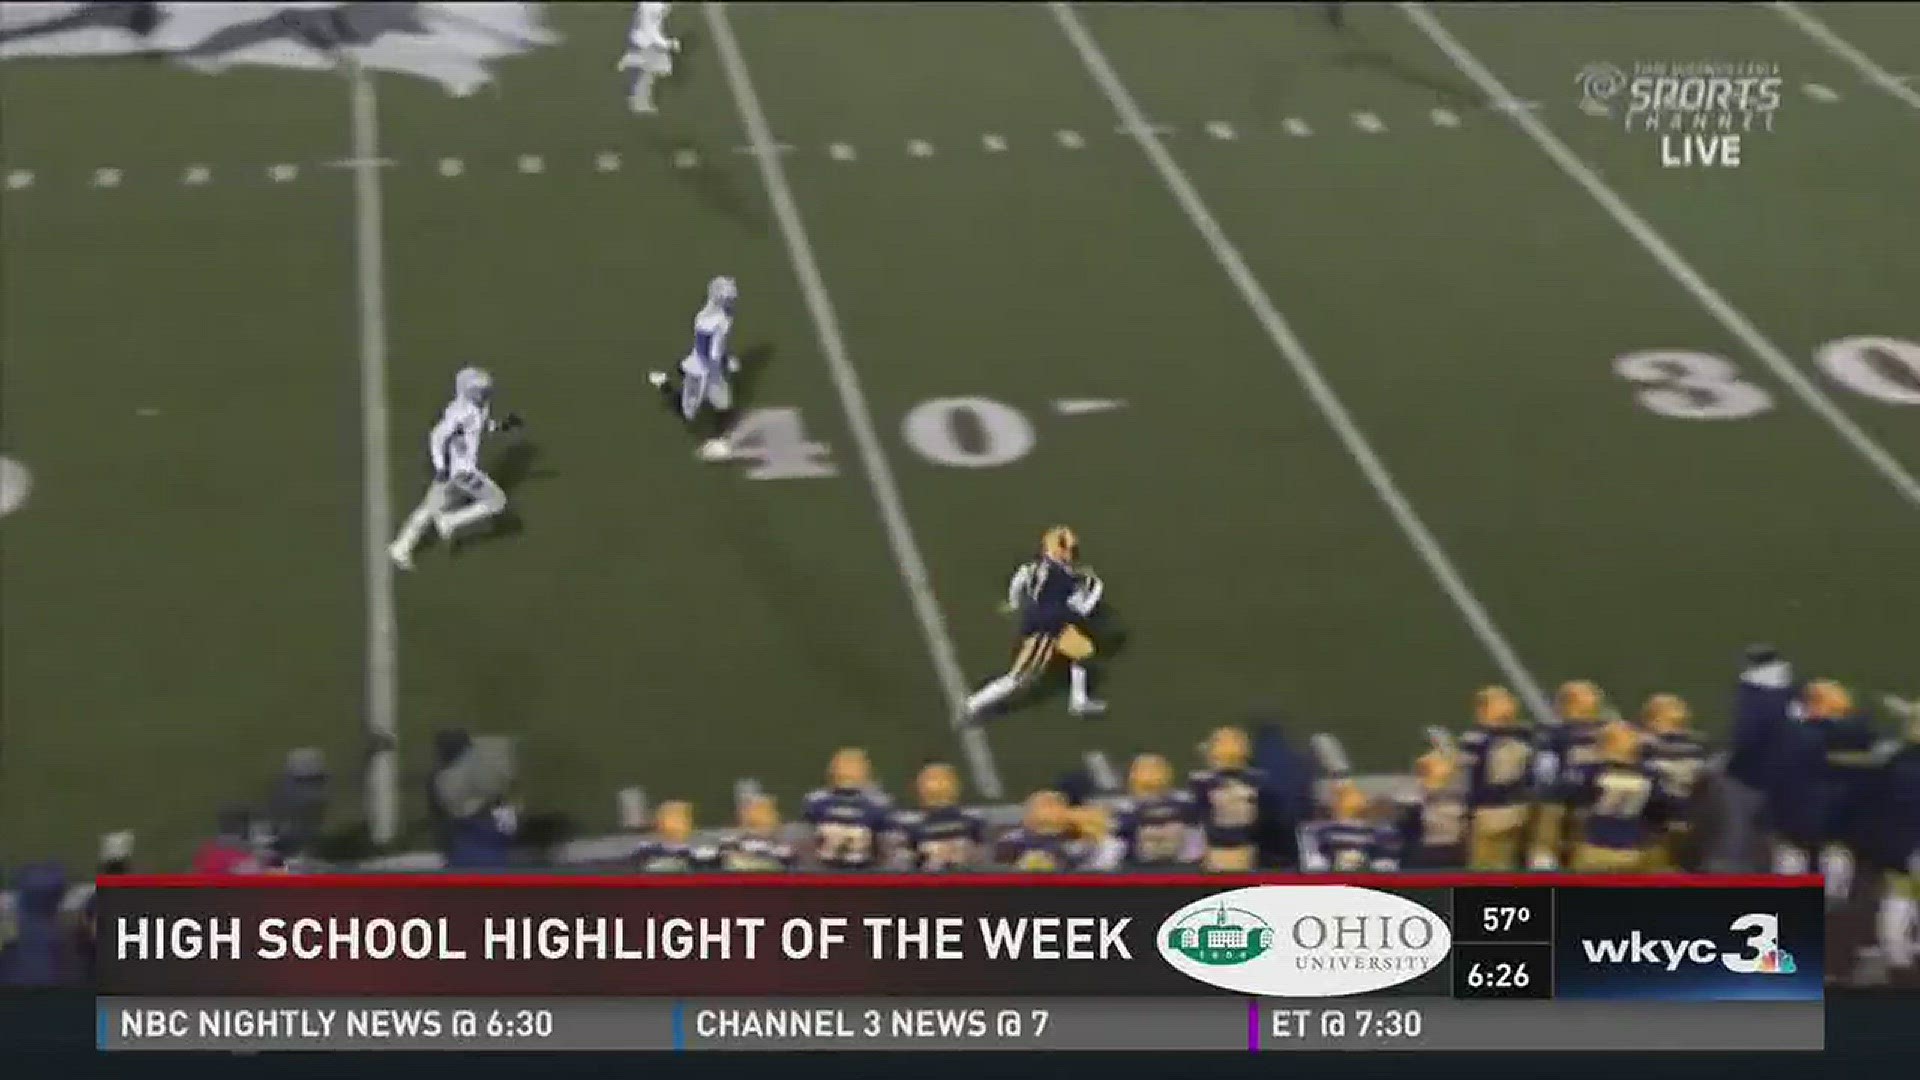 WKYC's Ohio University HS Highlight of the Week features Patrick Ryan's 69-yard TD run in St. Ignatius' 24-14 state semifinal win against Olentangy Liberty.